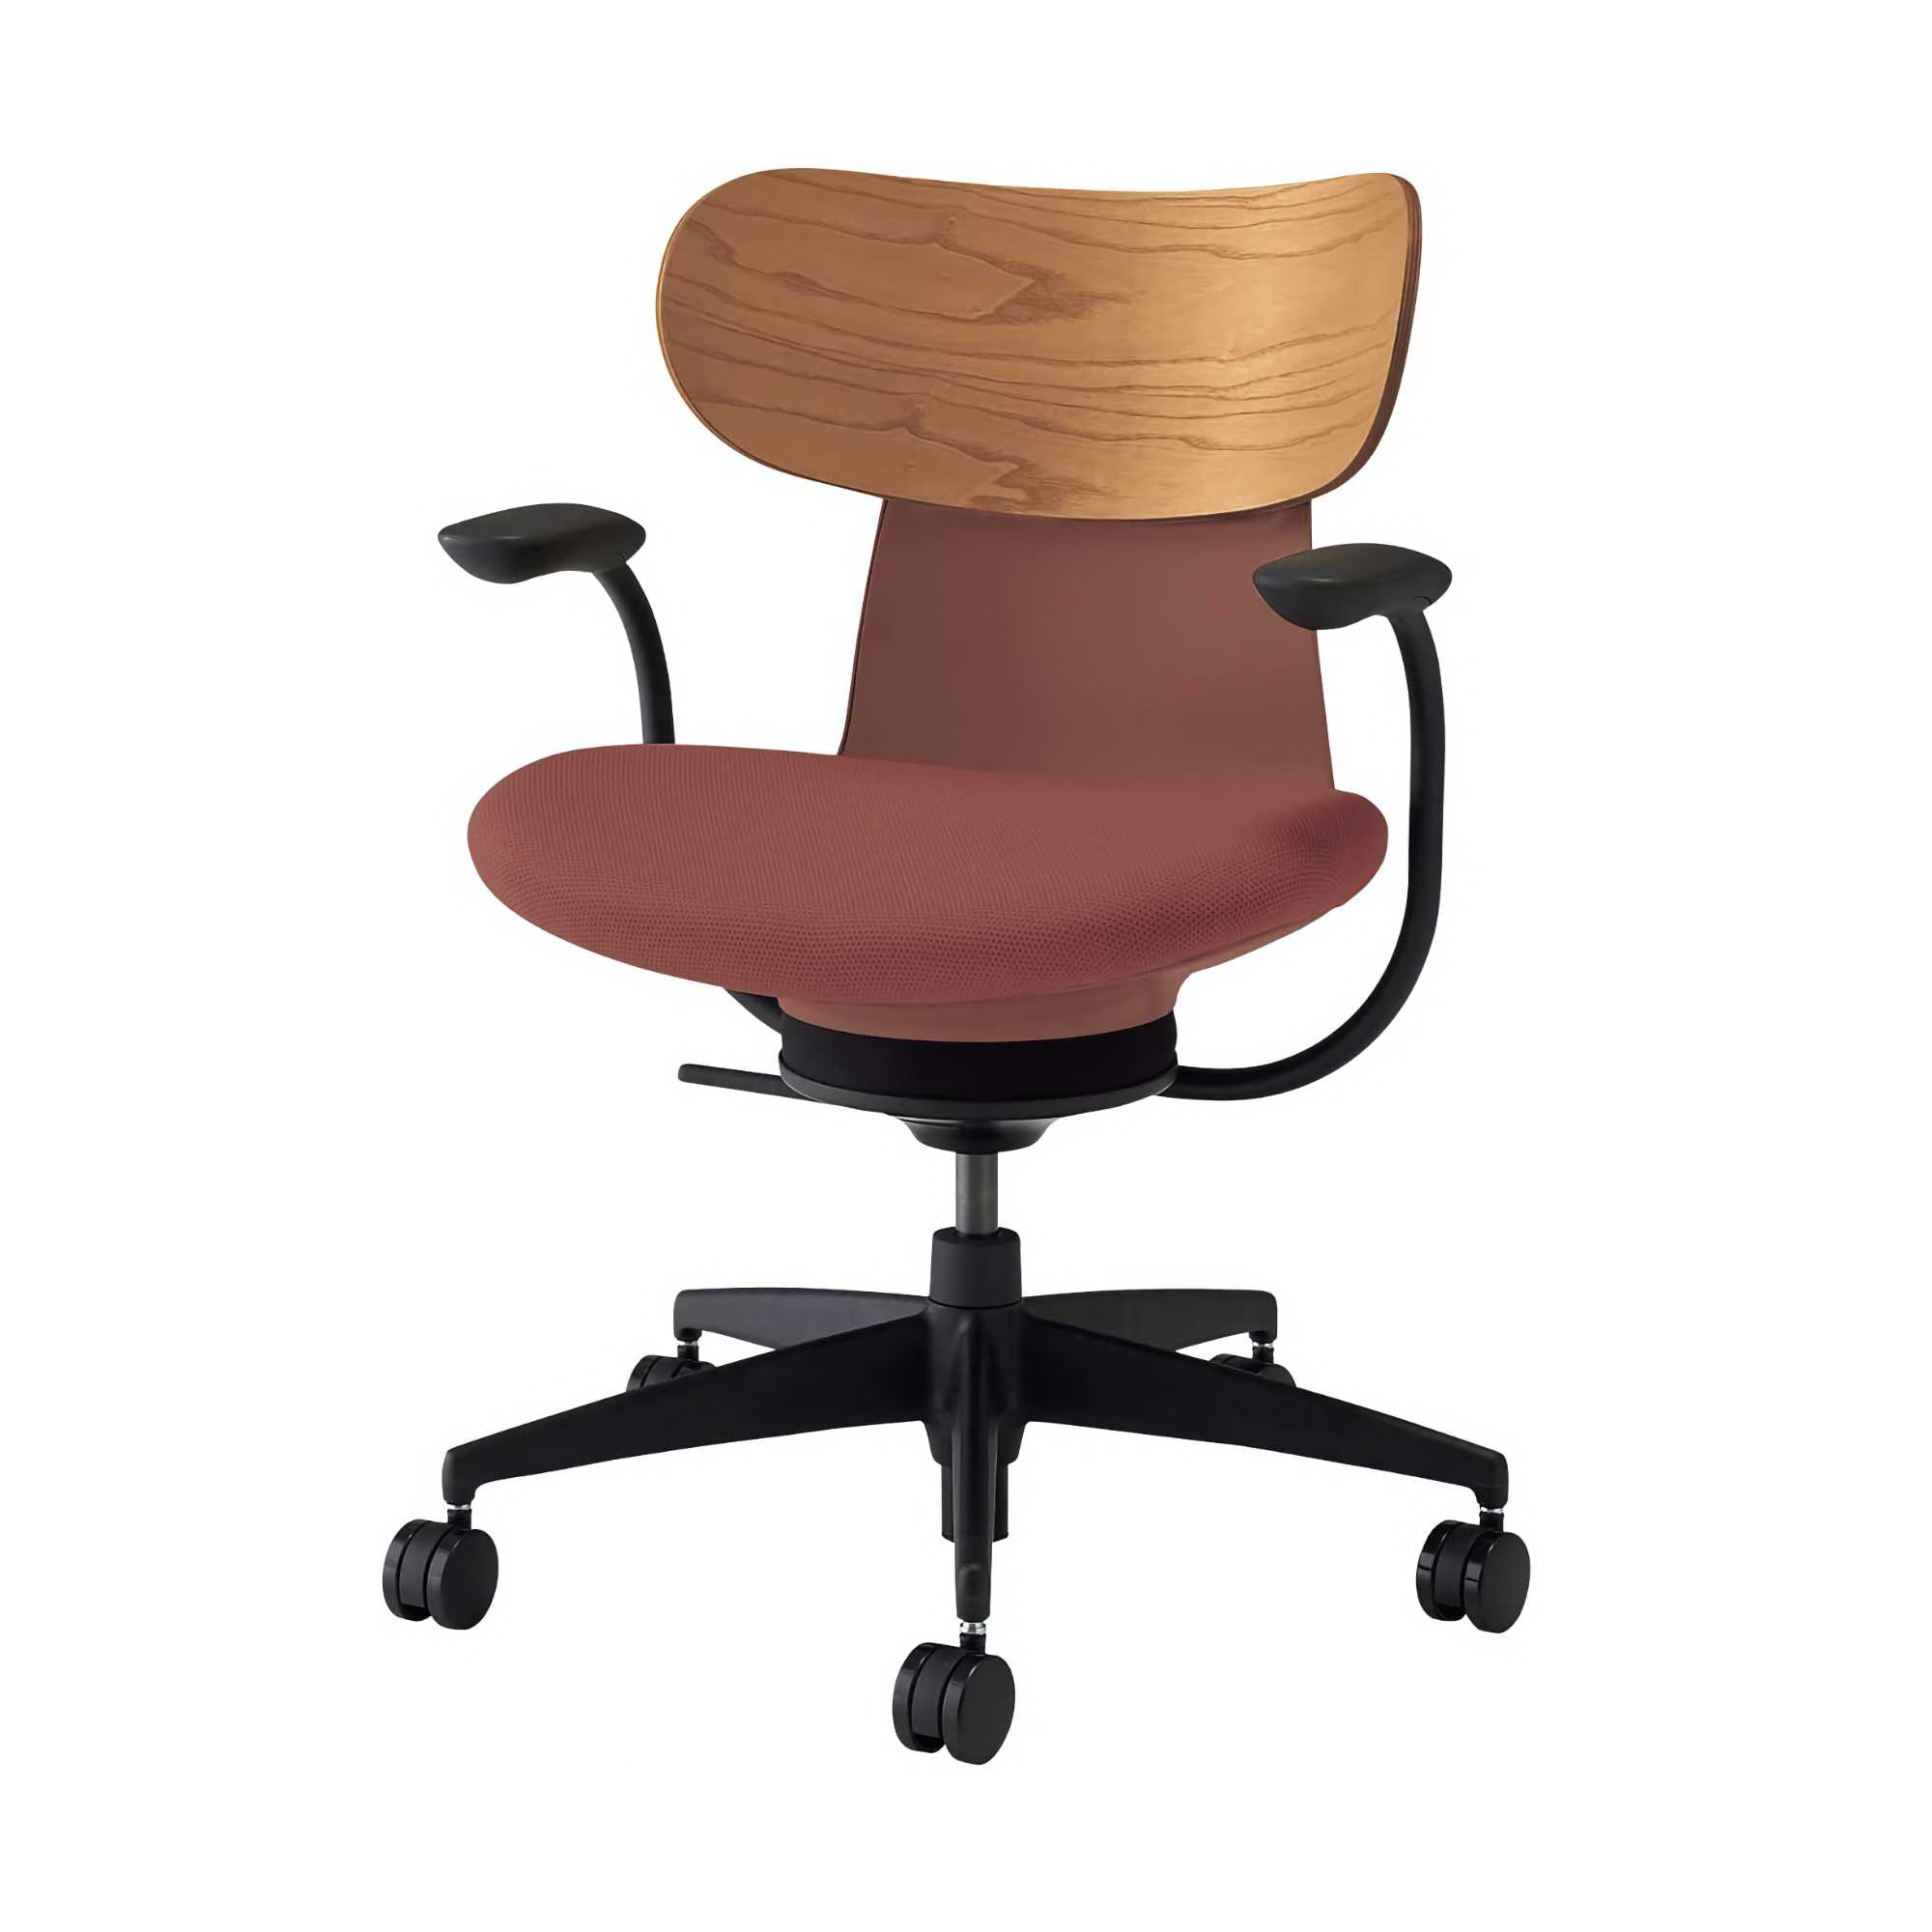 Kokuyo Inglife Office Chair Dark Plywood Back with Arm, Red